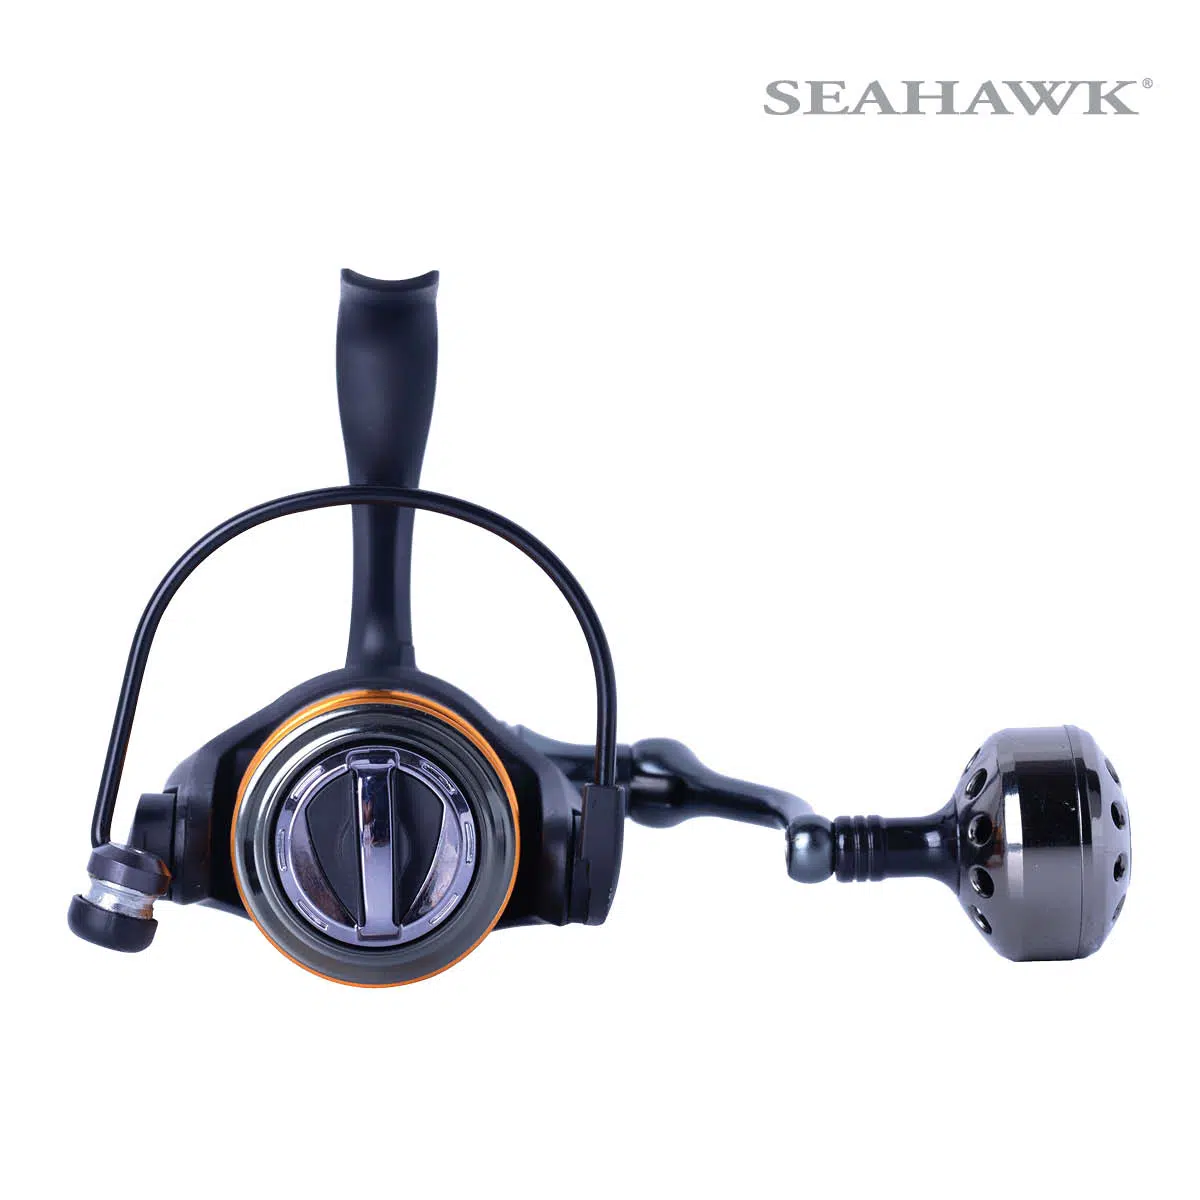  SeaKnight Archer II Spinning Reels, 8+1 Shielded BB, High Gear  Ratio 5.2:1/4.9:1, CNC Aluminum Spool Large PVC Knob Smooth Powerful  Freshwater Spinning Fishing Reel : Sports & Outdoors